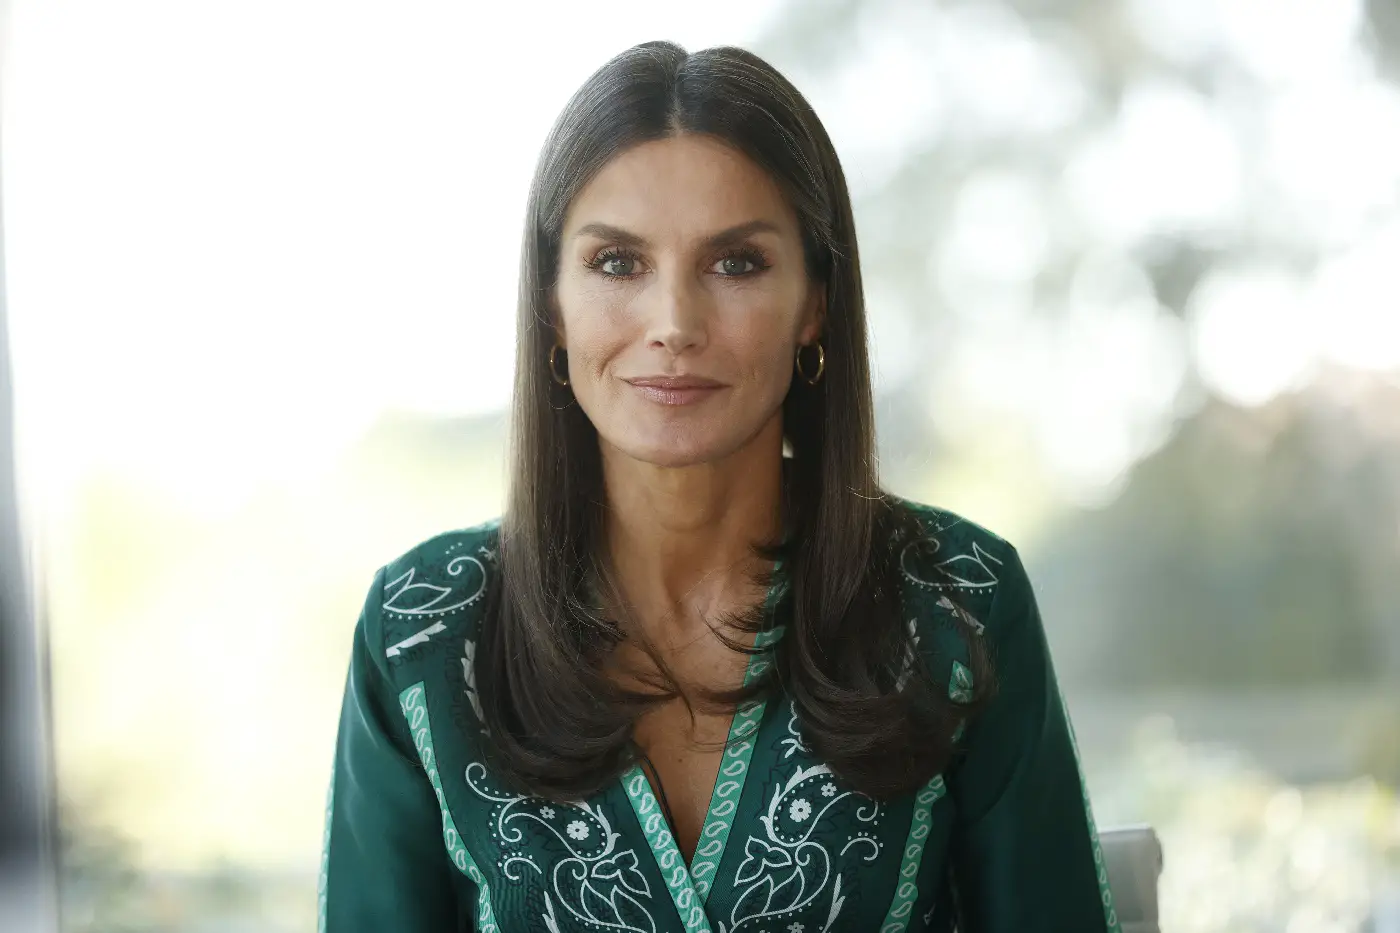 Queen Letizia attended the digital State Platform for People Presentation